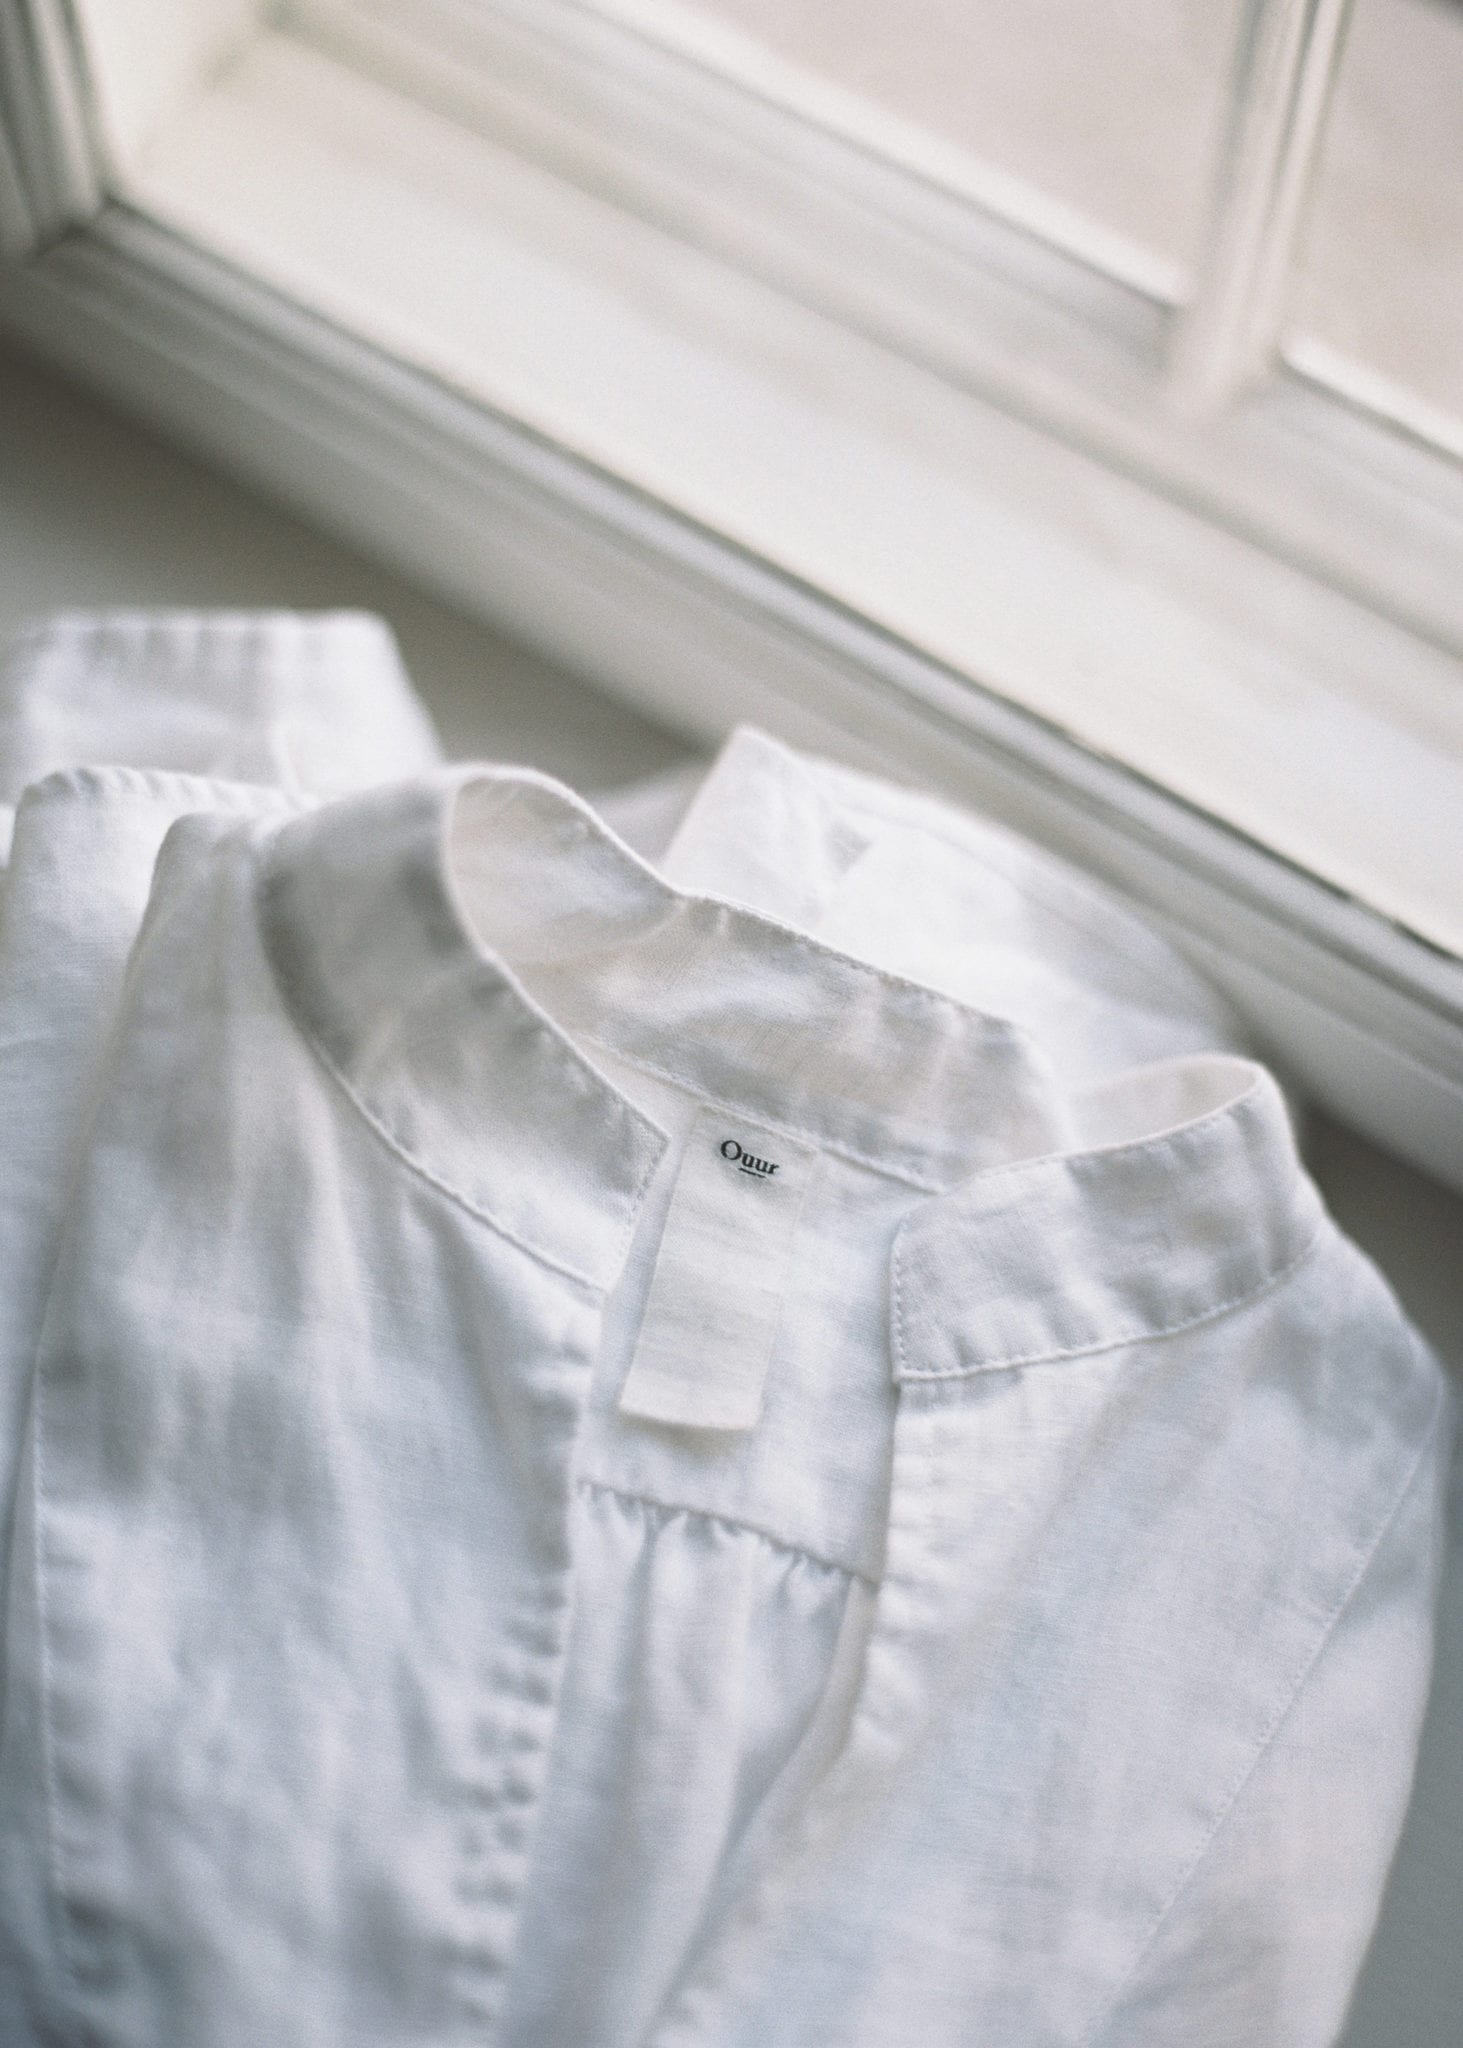 Kinfolk is making clothes...A look at Ouur. - Wit & Delight